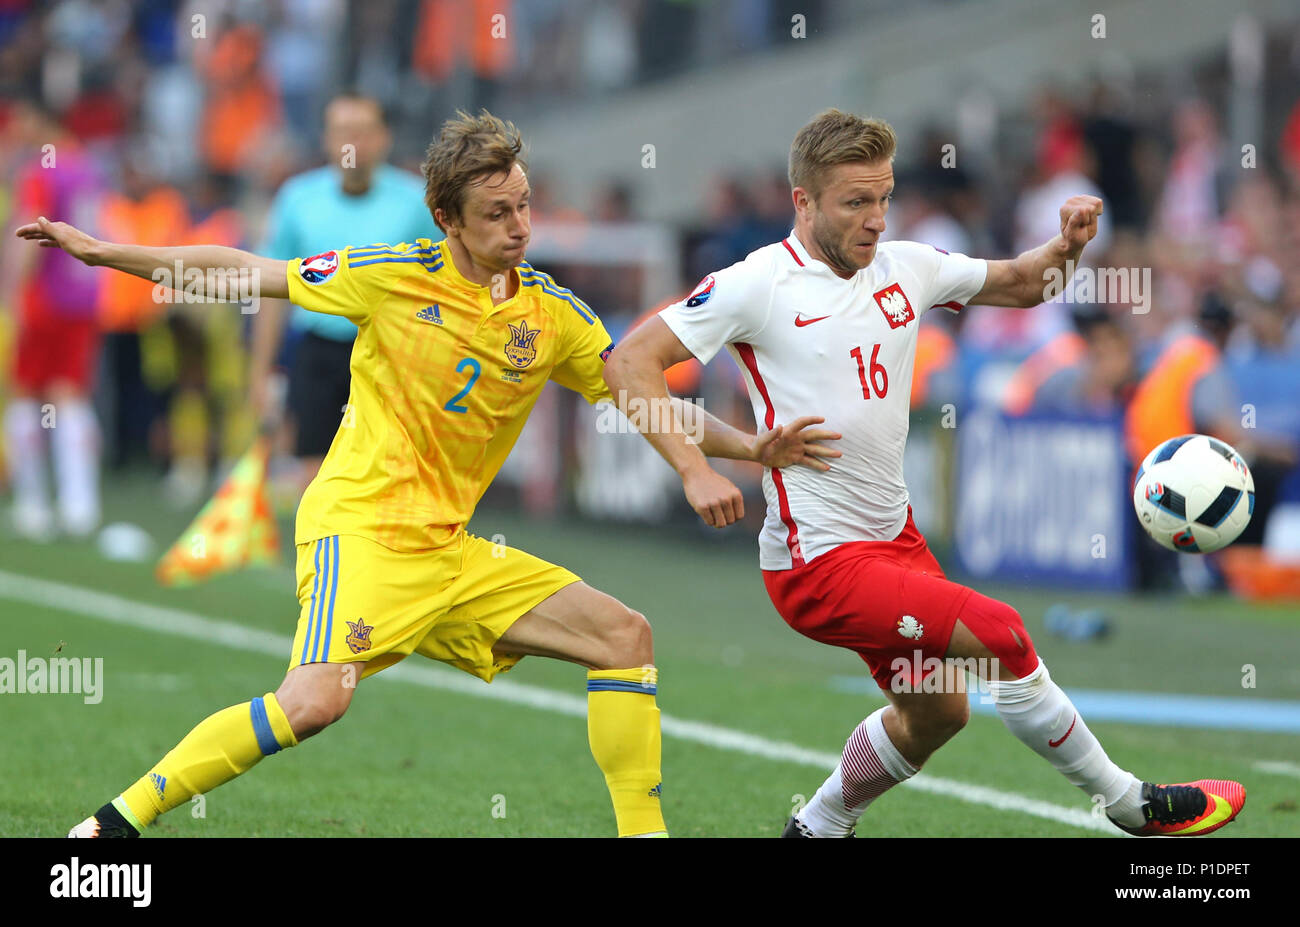 MARSEILLE, FRANCE - JUNE 21, 2016: Bohdan Butko of Ukraine (L) fights for a ball with Jakub Blaszczykowski of Poland during their UEFA EURO 2016 game  Stock Photo